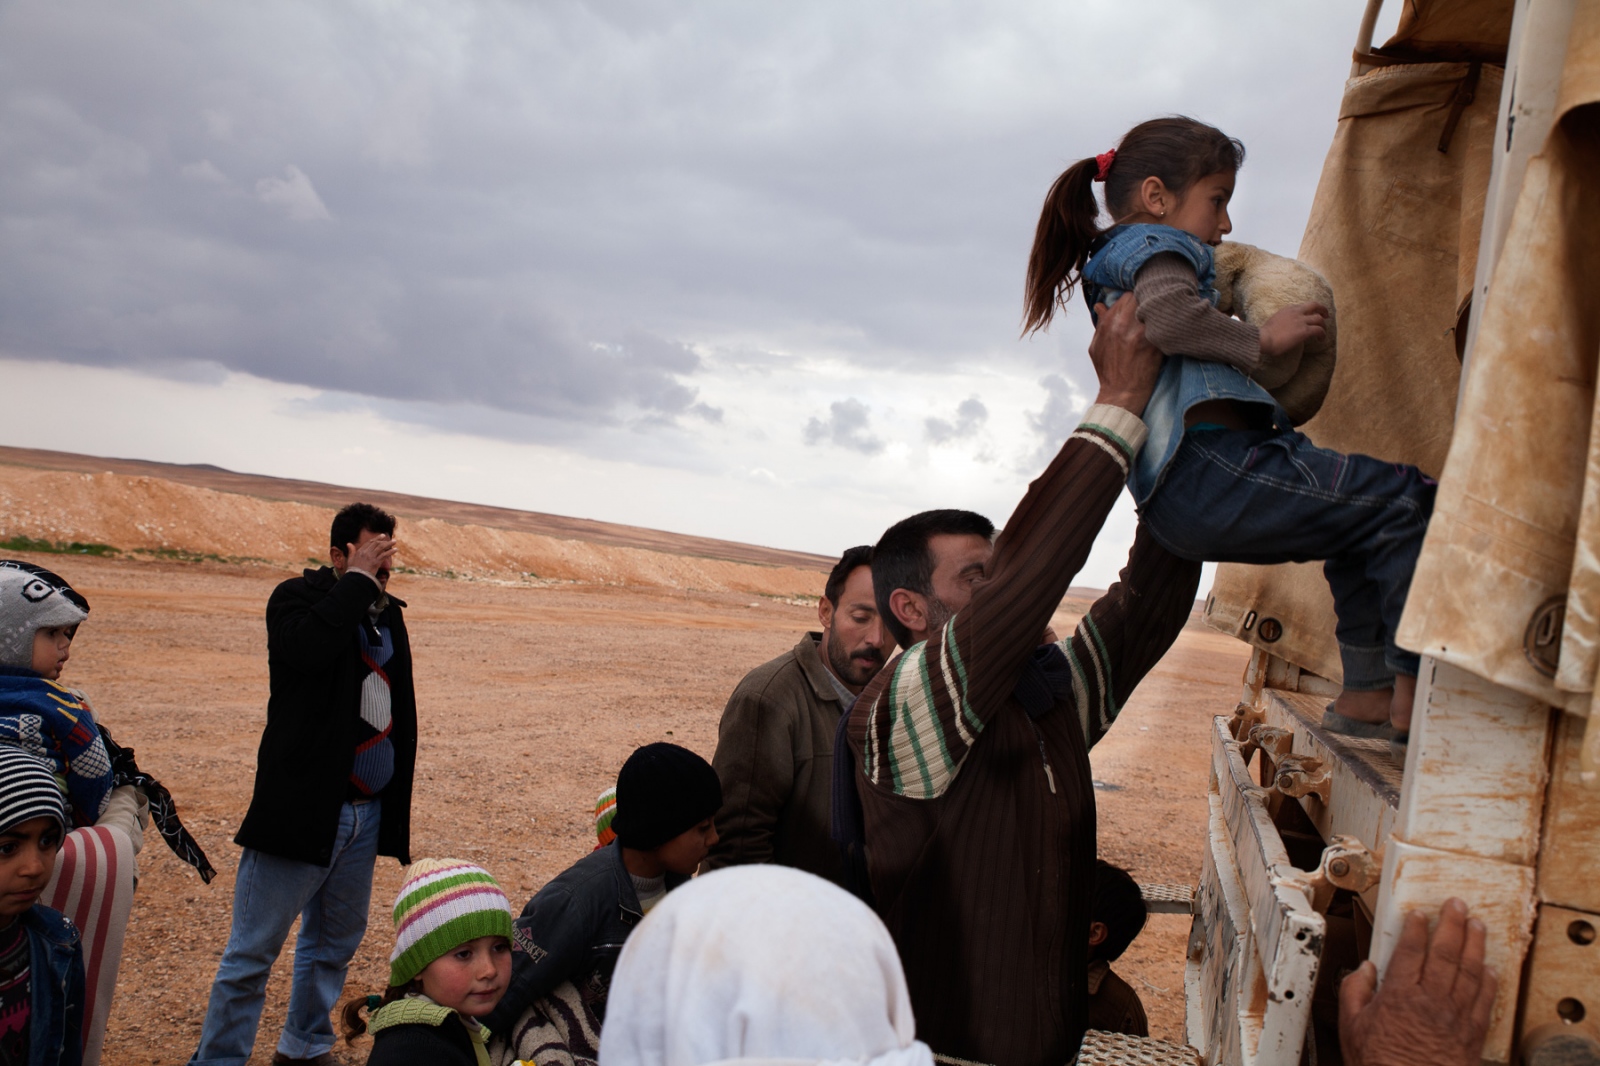 The Syrian Refugee Crisis - One this day the refugees hailed from Daraa, a city in...